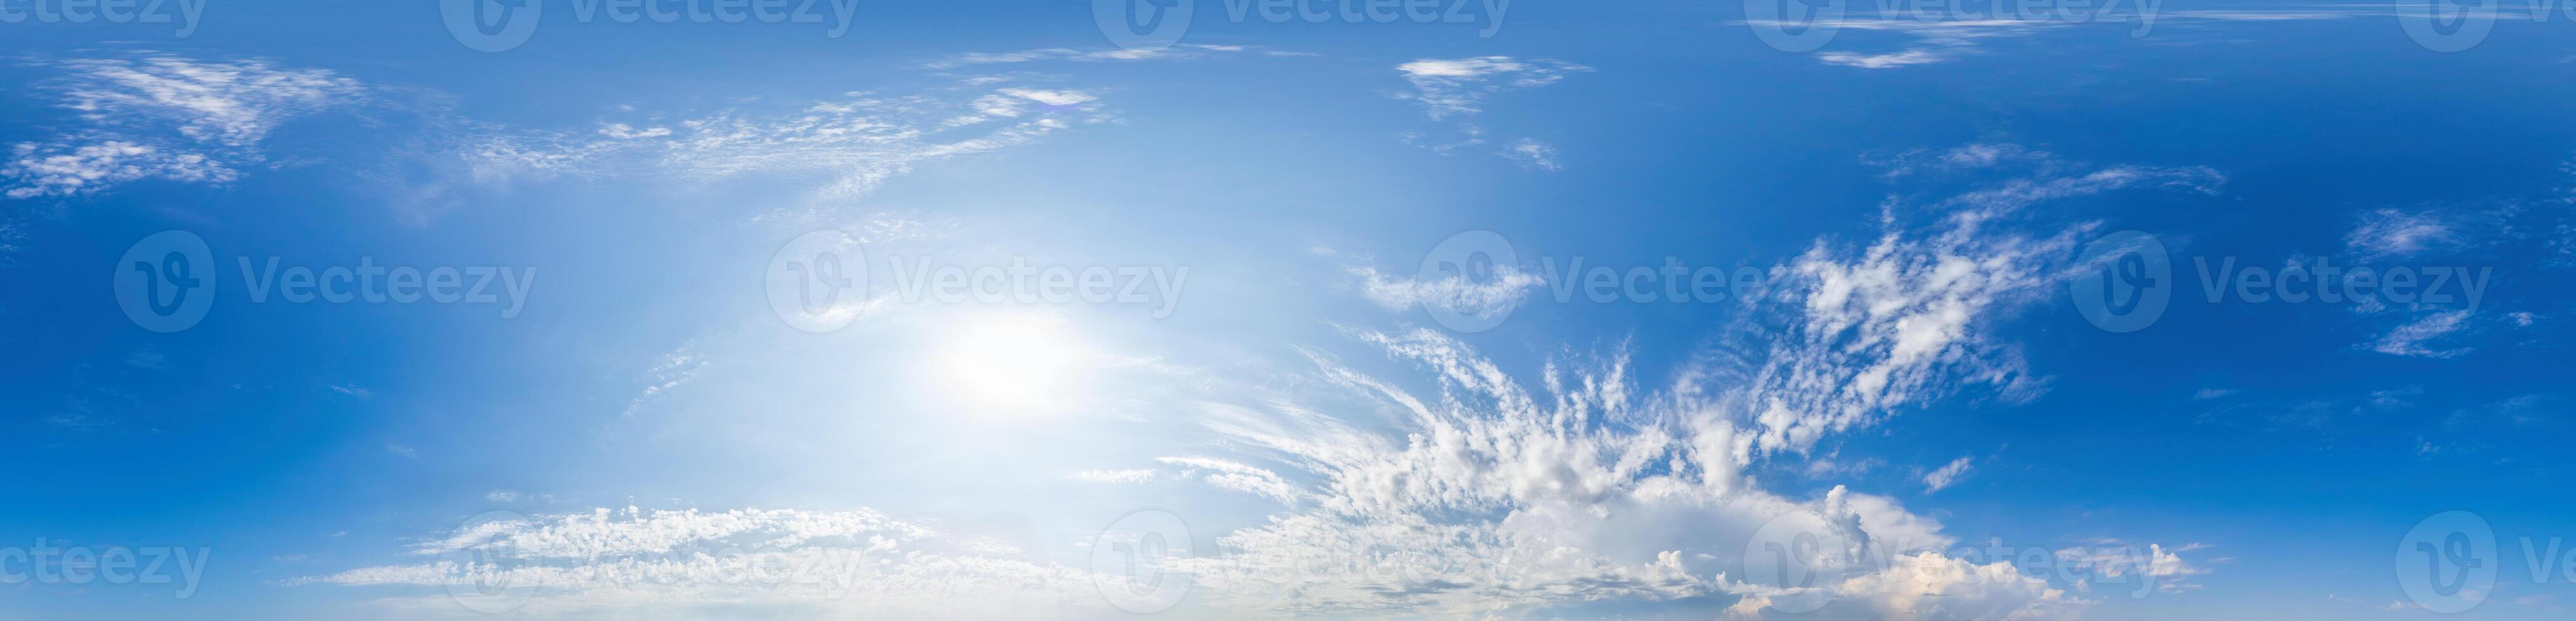 sky panorama with Cumulus clouds in Seamless spherical equirectangular format with complete zenith for use in 3D graphics, game and for composites in aerial drone 360 degree panoramas as a sky dome photo